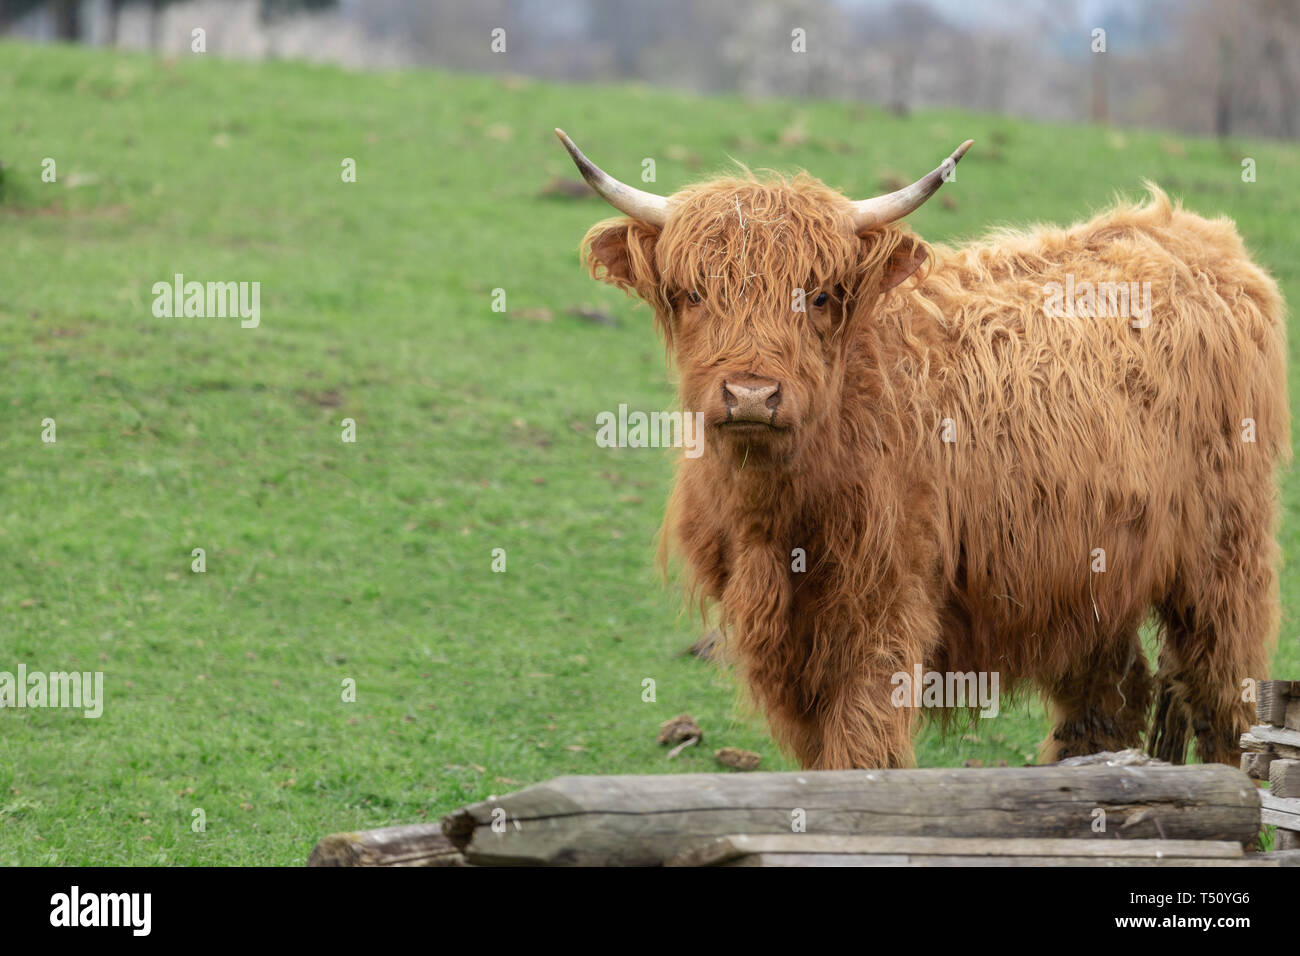 Highland cow cattle in Germany Stock Photo